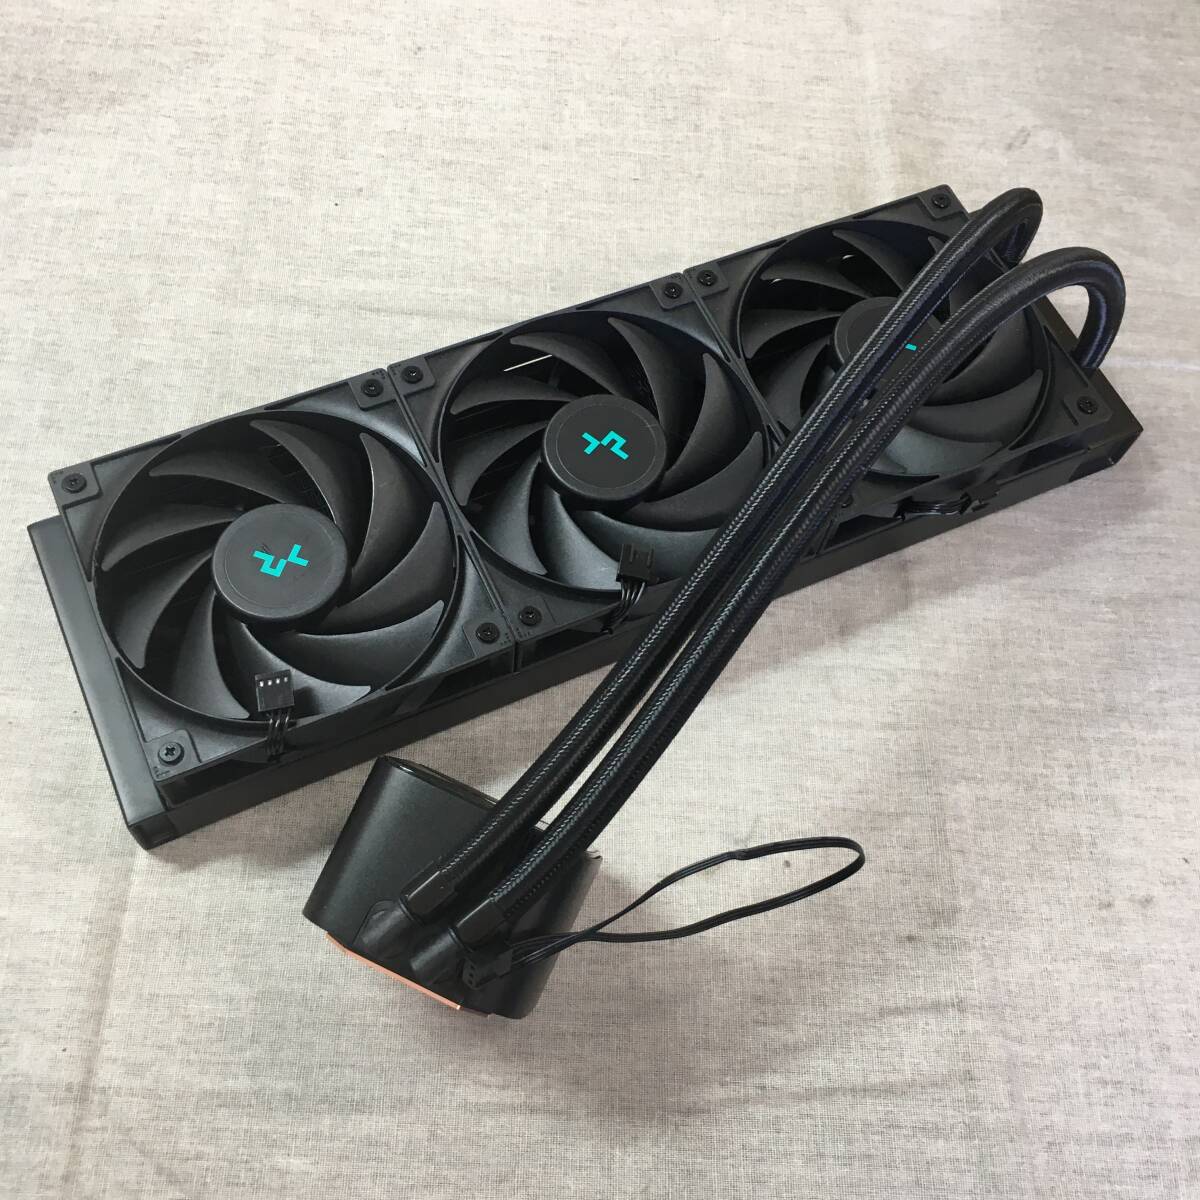  present condition goods DEEPCOOL LED non equipped system optimum . all black design 360mm simple water cooling cooler,air conditioner [ LS720S ZERO DARK ]